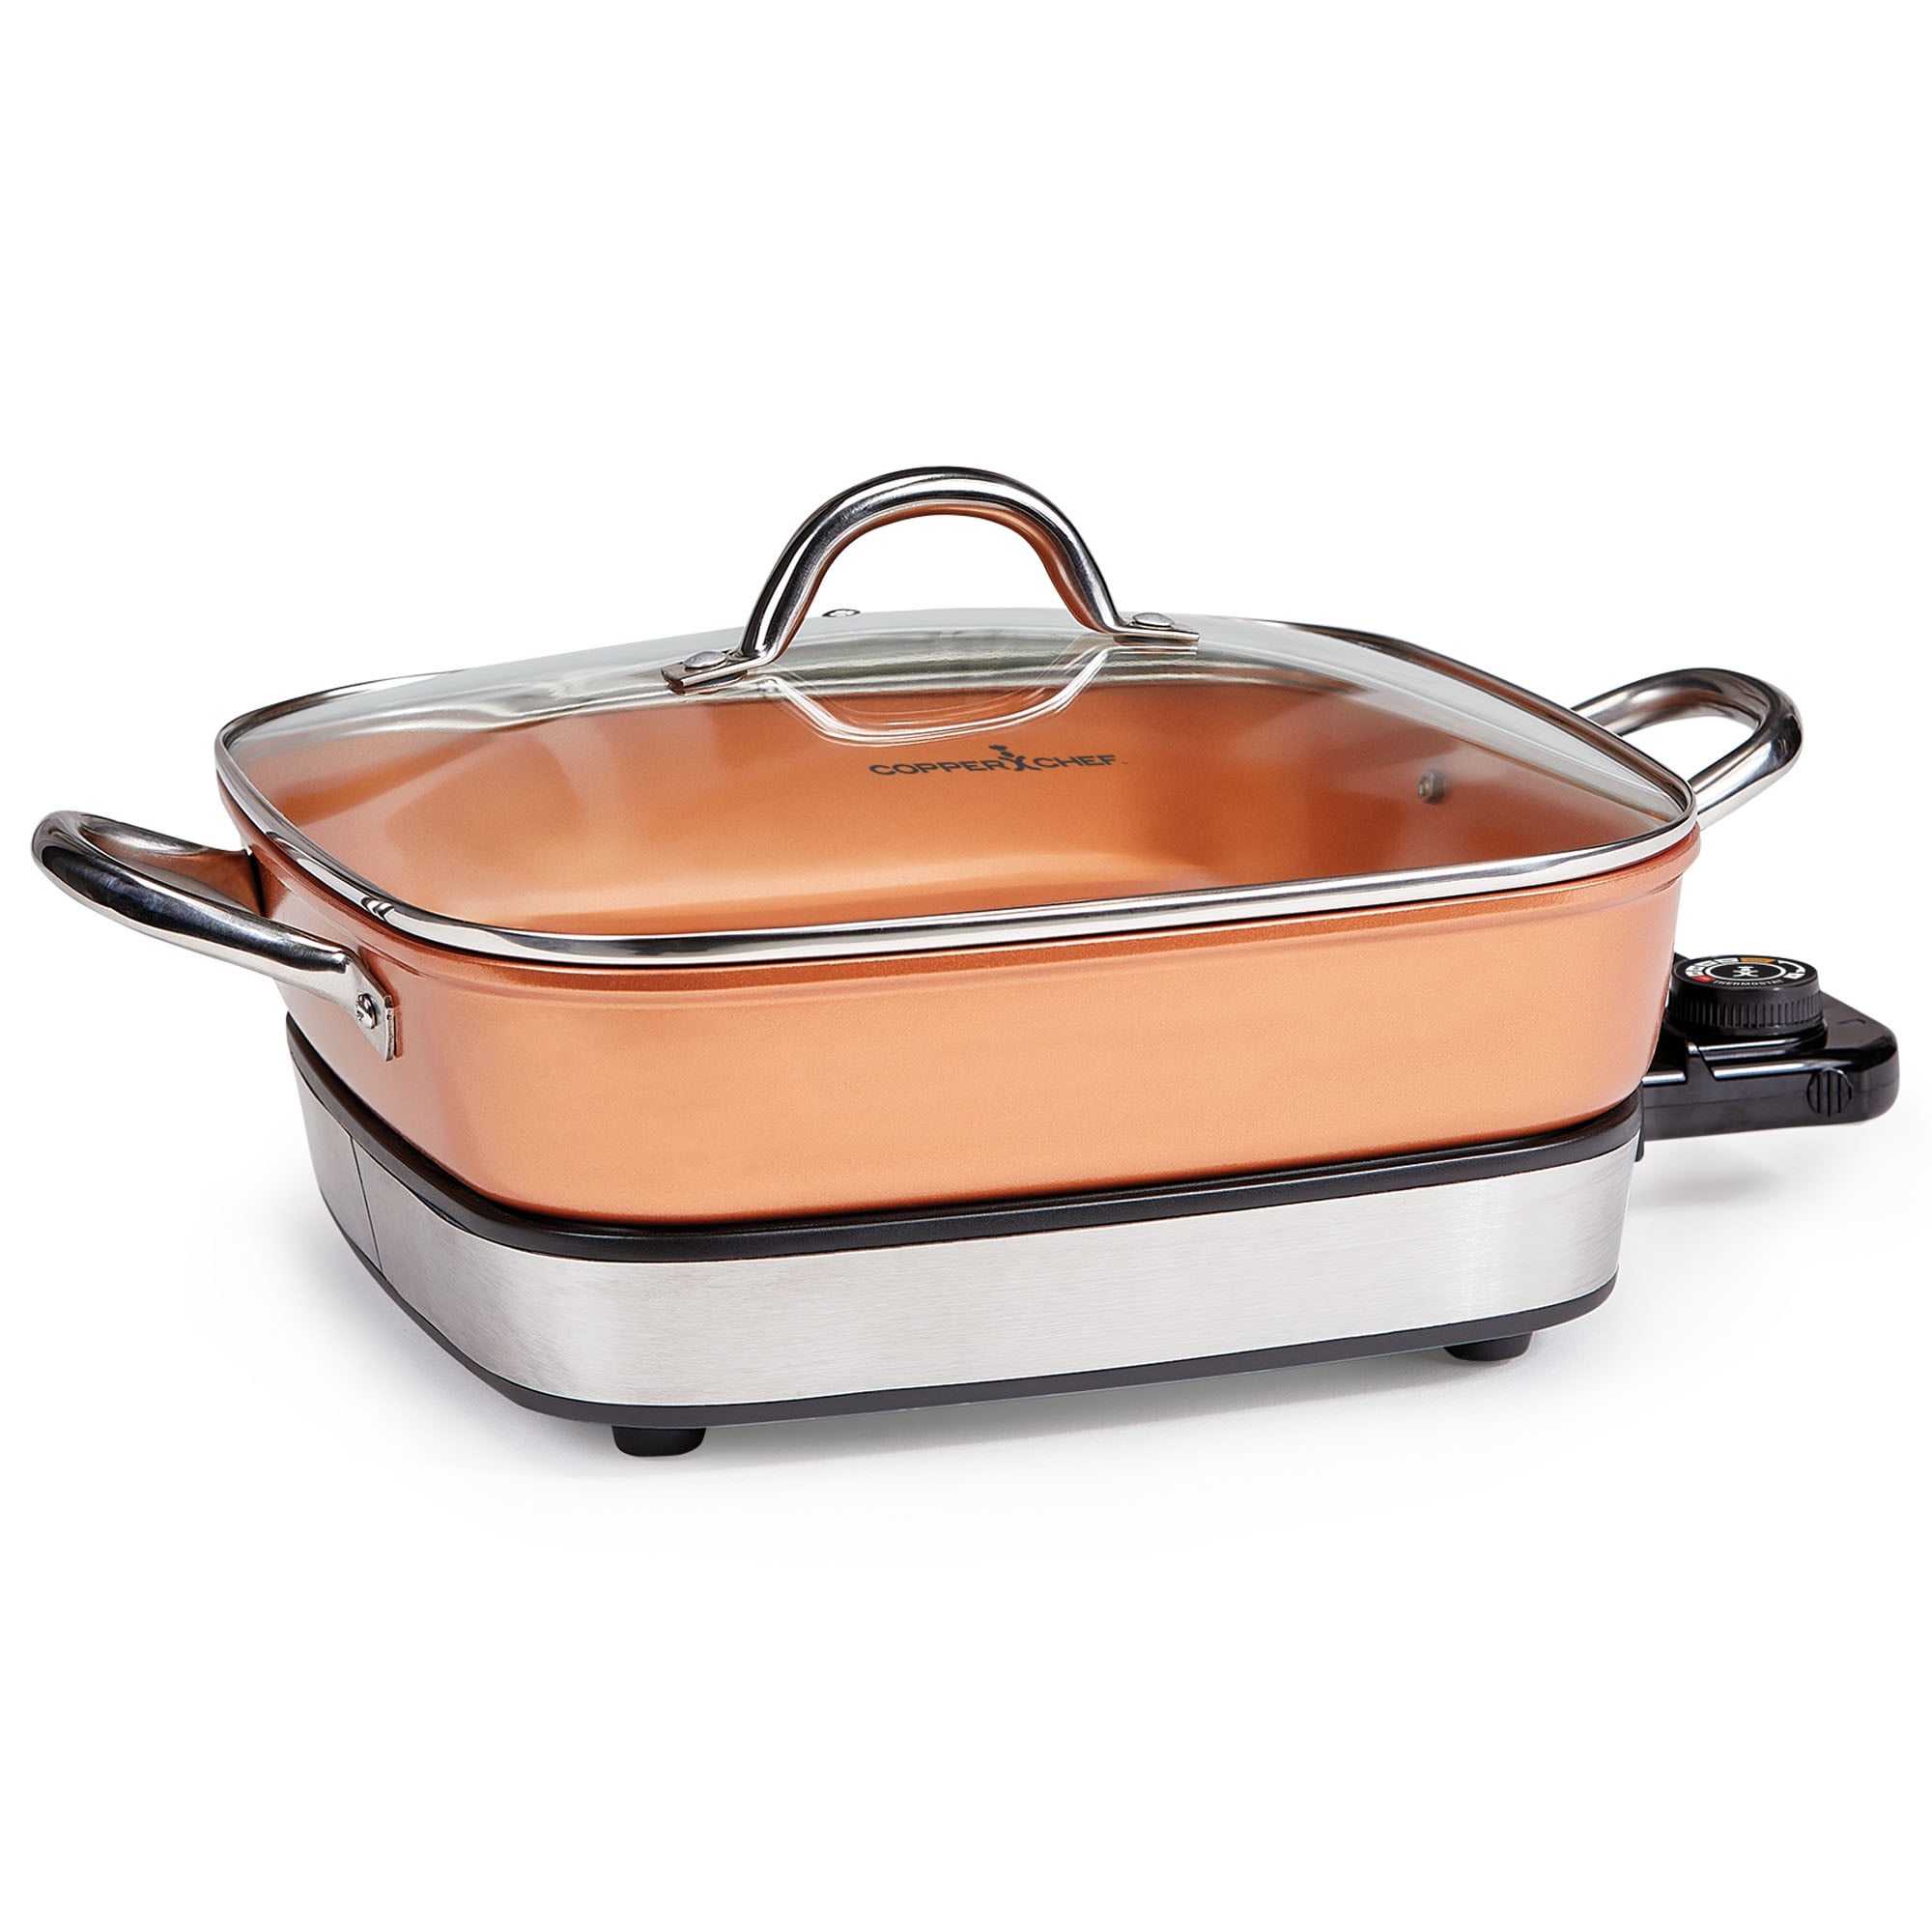 11 Ceramic Copper Nonstick Frying Sauté Pan for Electric Glass or Ceramic  Cooktops Oven Safe - Bed Bath & Beyond - 30094484